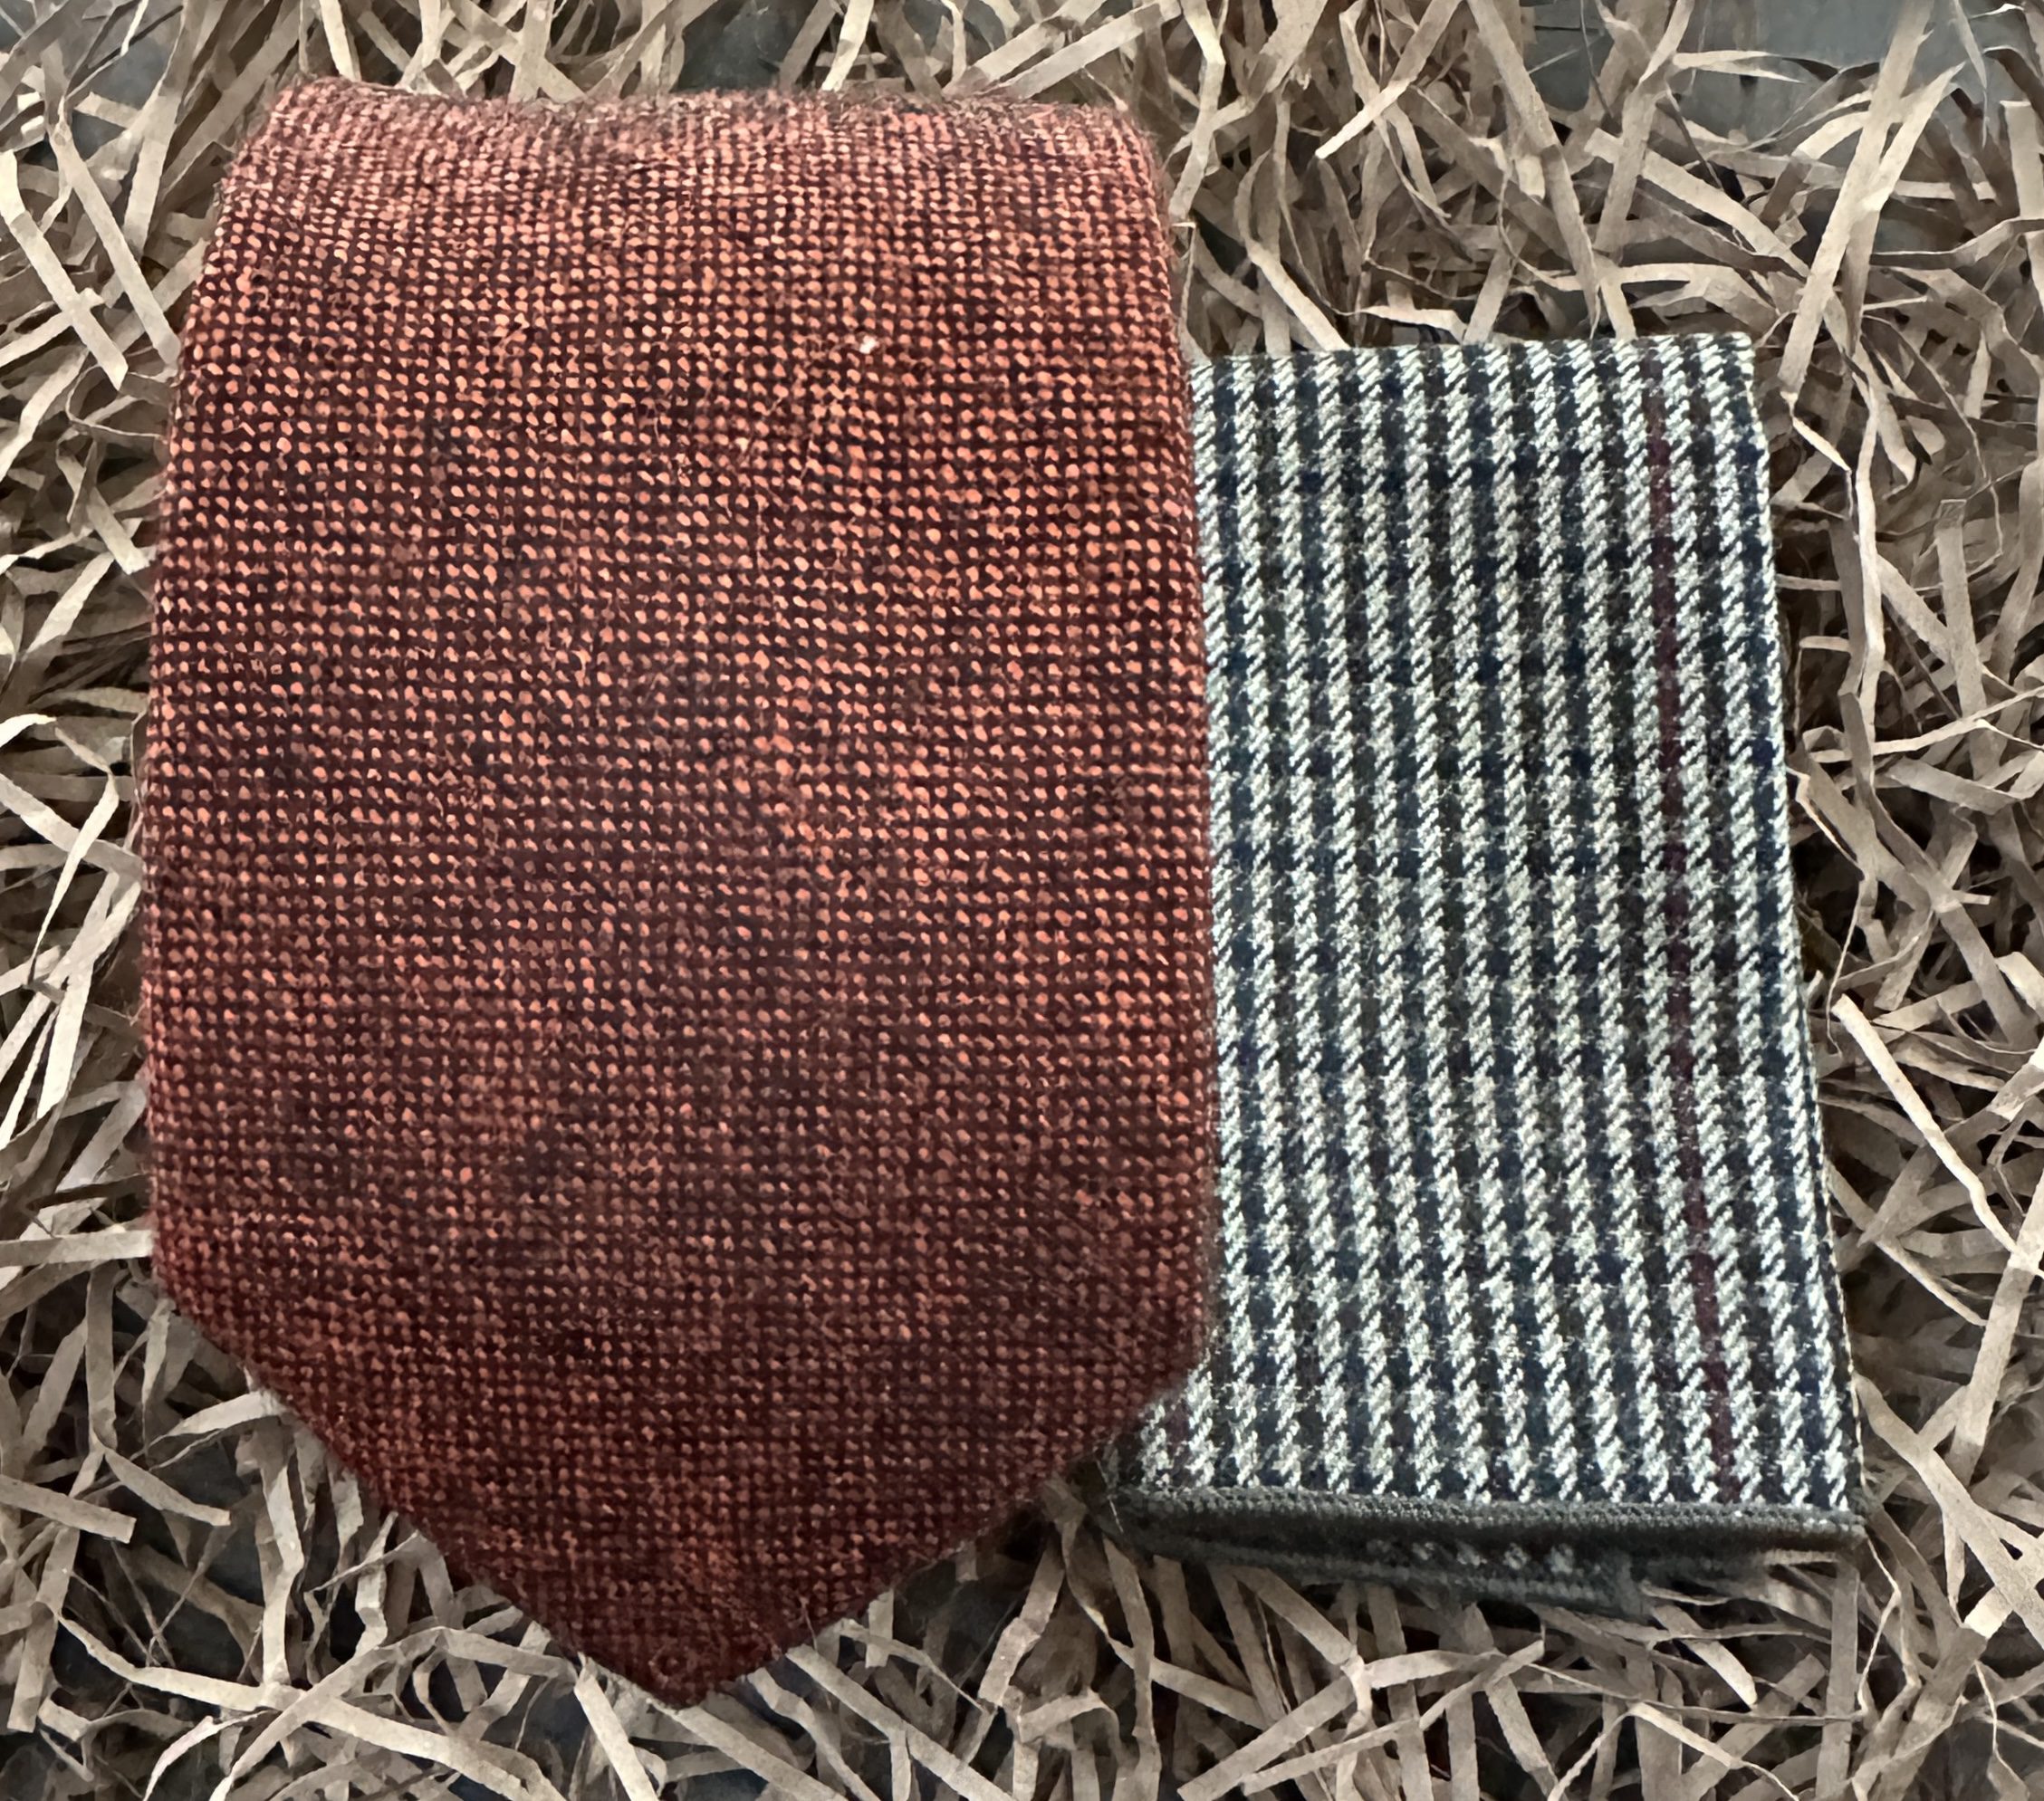 An orange, men's tie and wool checked pocket handkerchief for men's gifts